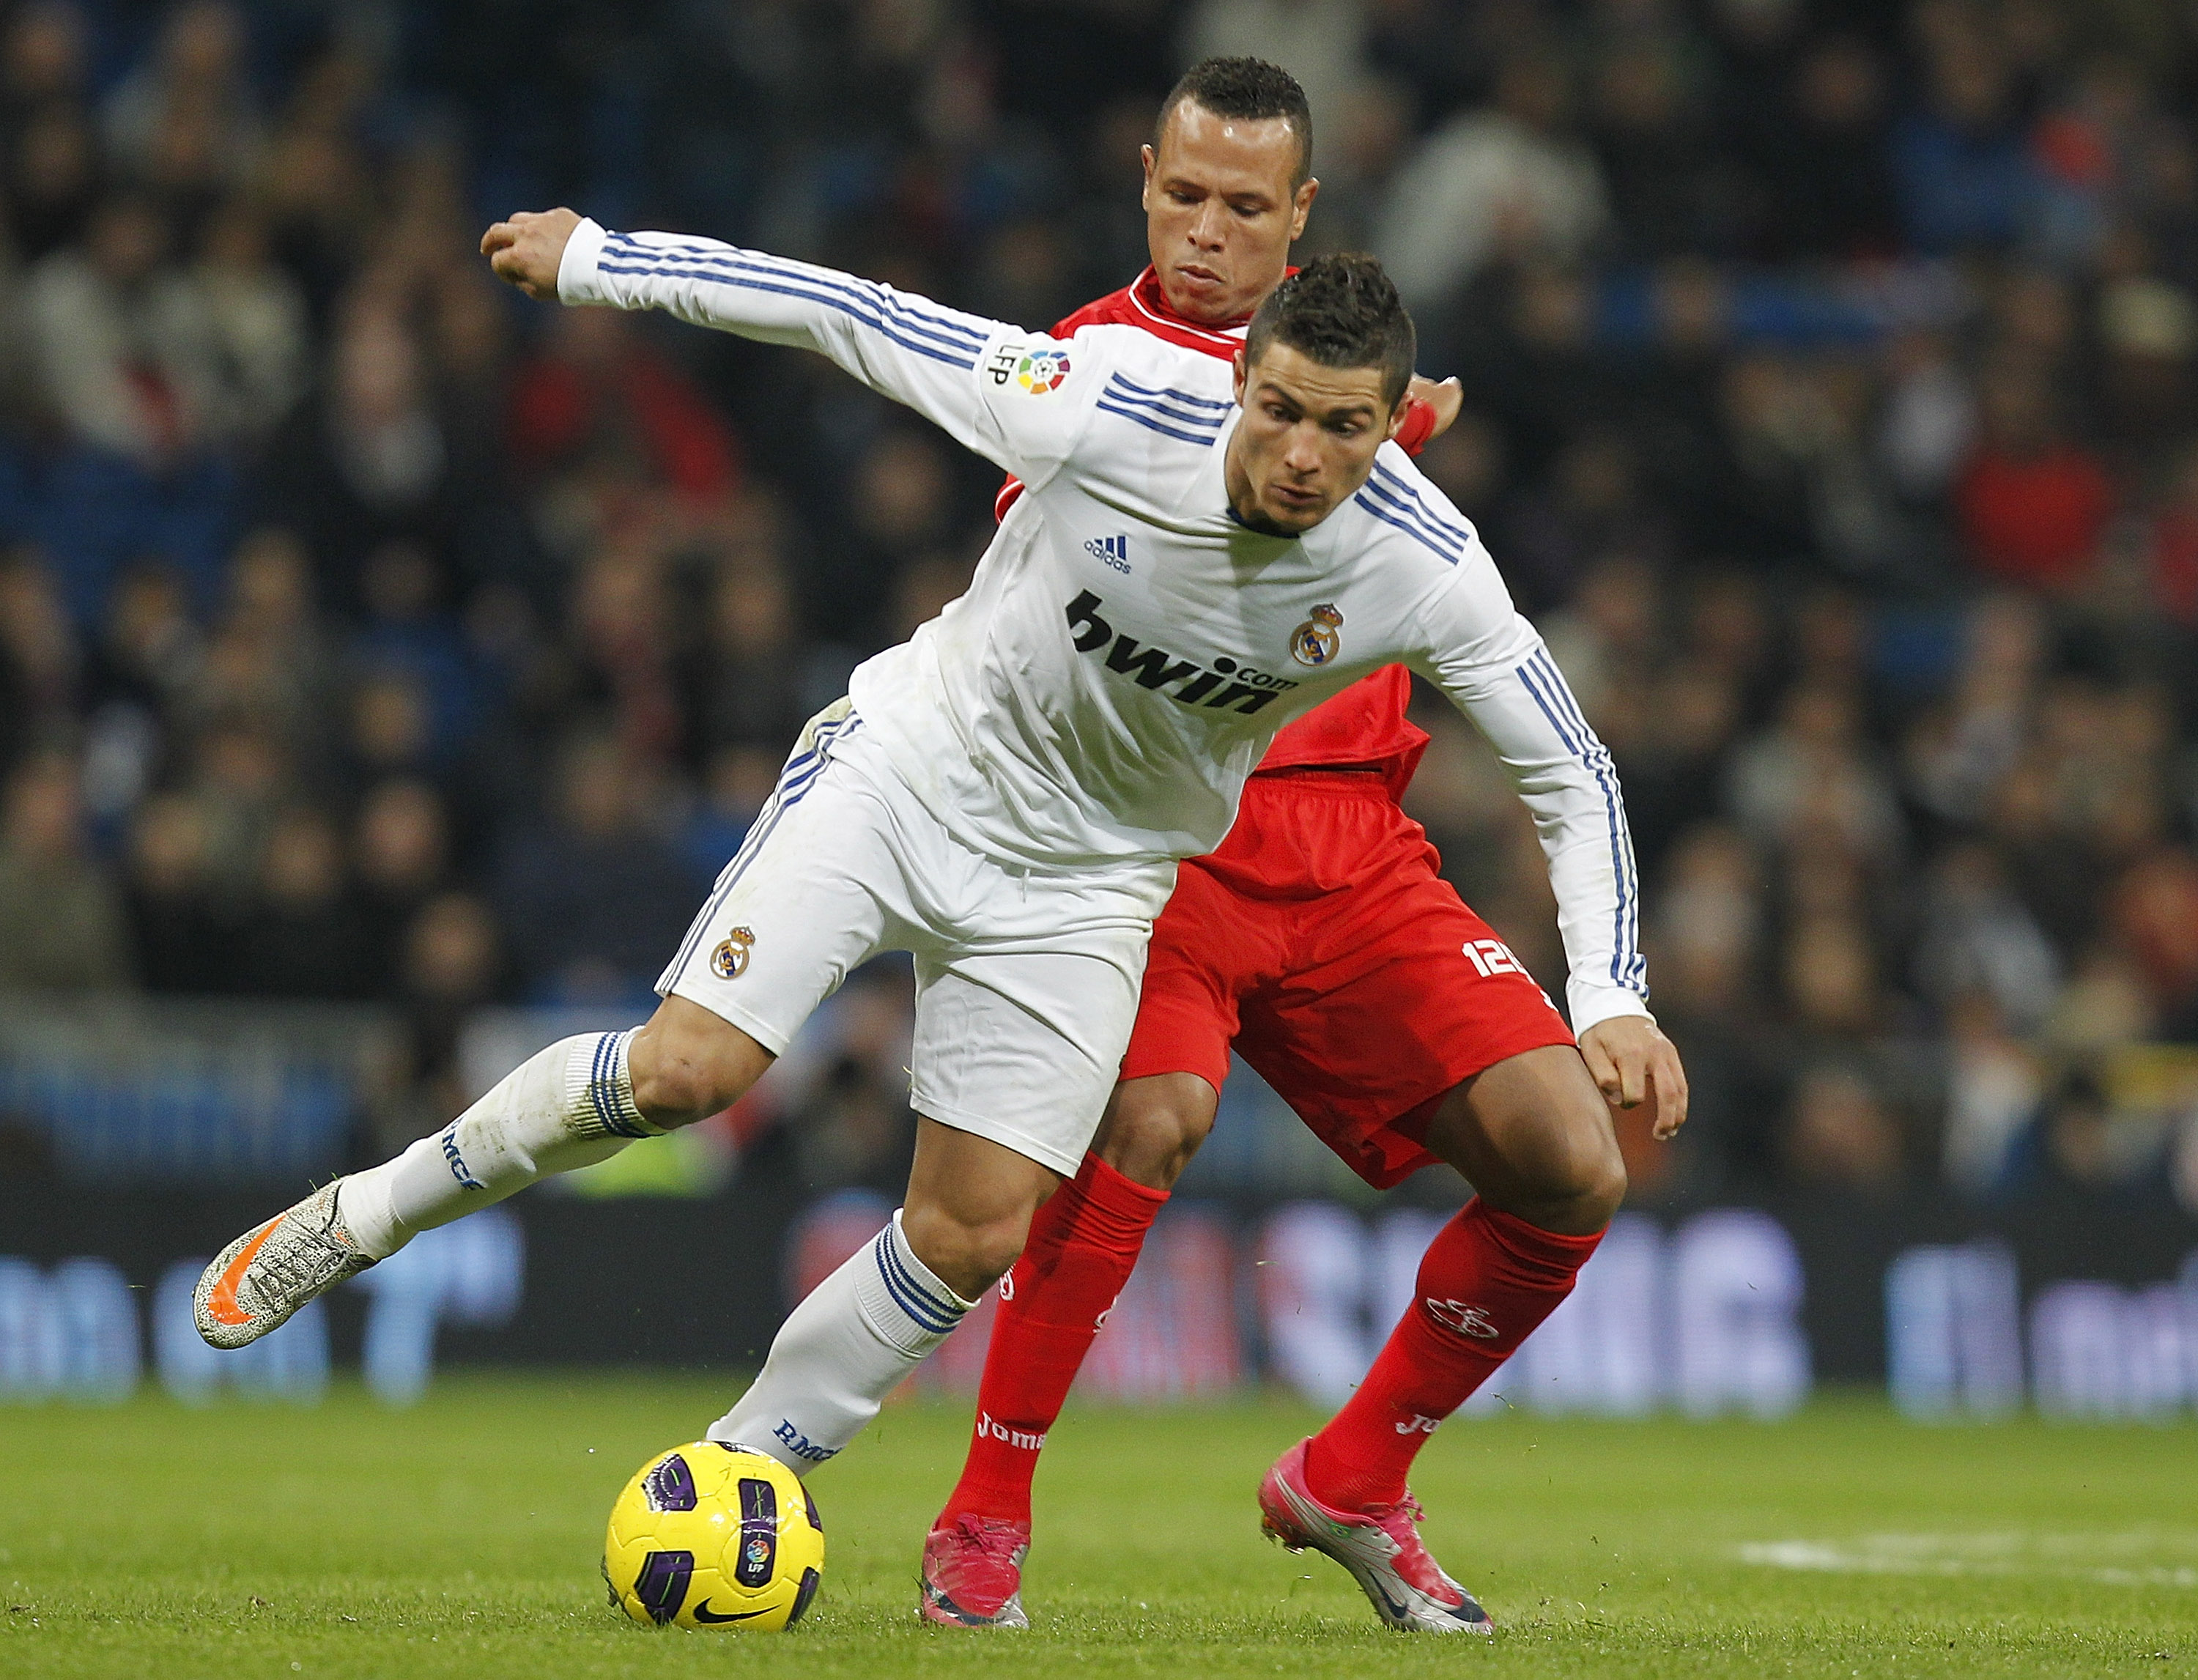 MADRID, SPAIN - DECEMBER 19:  Cristiano Ronaldo of Real Madrid fights for the ball with Luis Fabiano of Sevilla during the La Liga match between Real Madrid and Sevilla at Estadio Santiago Bernabeu on December 19, 2010 in Madrid, Spain. Real Madrid won th